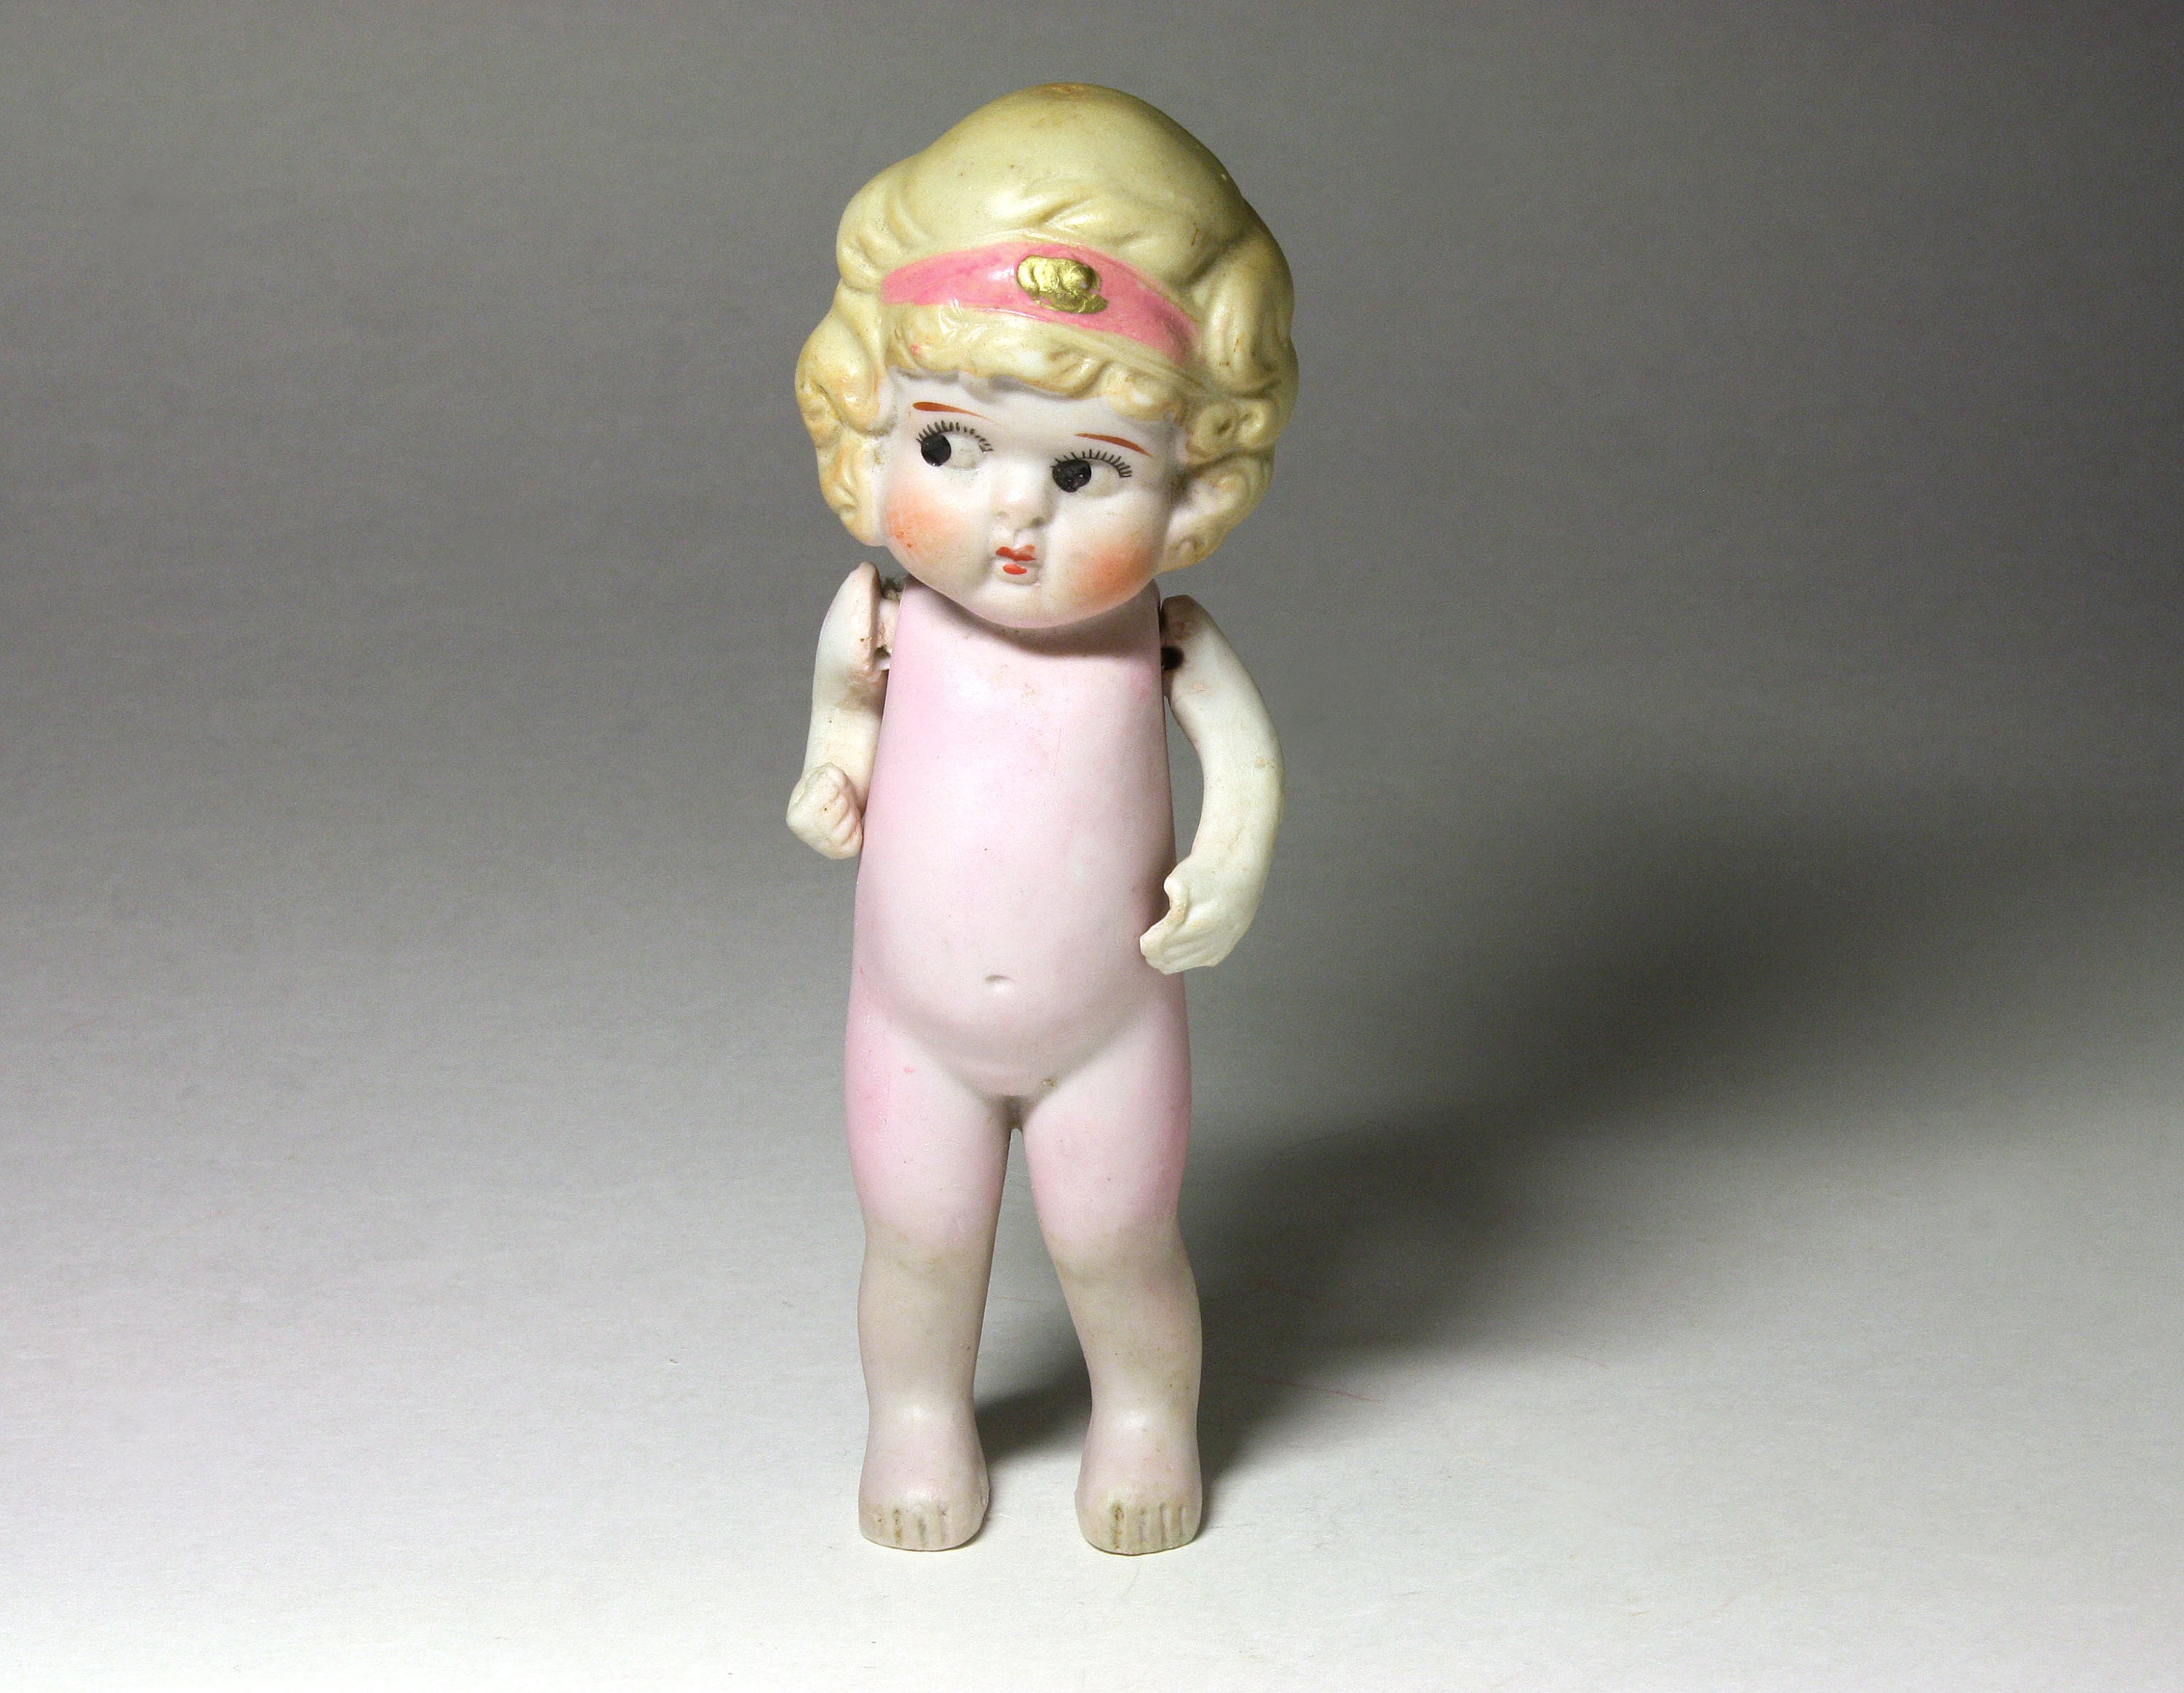 Old Bisque doll Betty Boop, Kewpie, Flapper antique doll, big eye doll,  Dollhouse size, All bisque, made in Japan, Christmas gift for mom